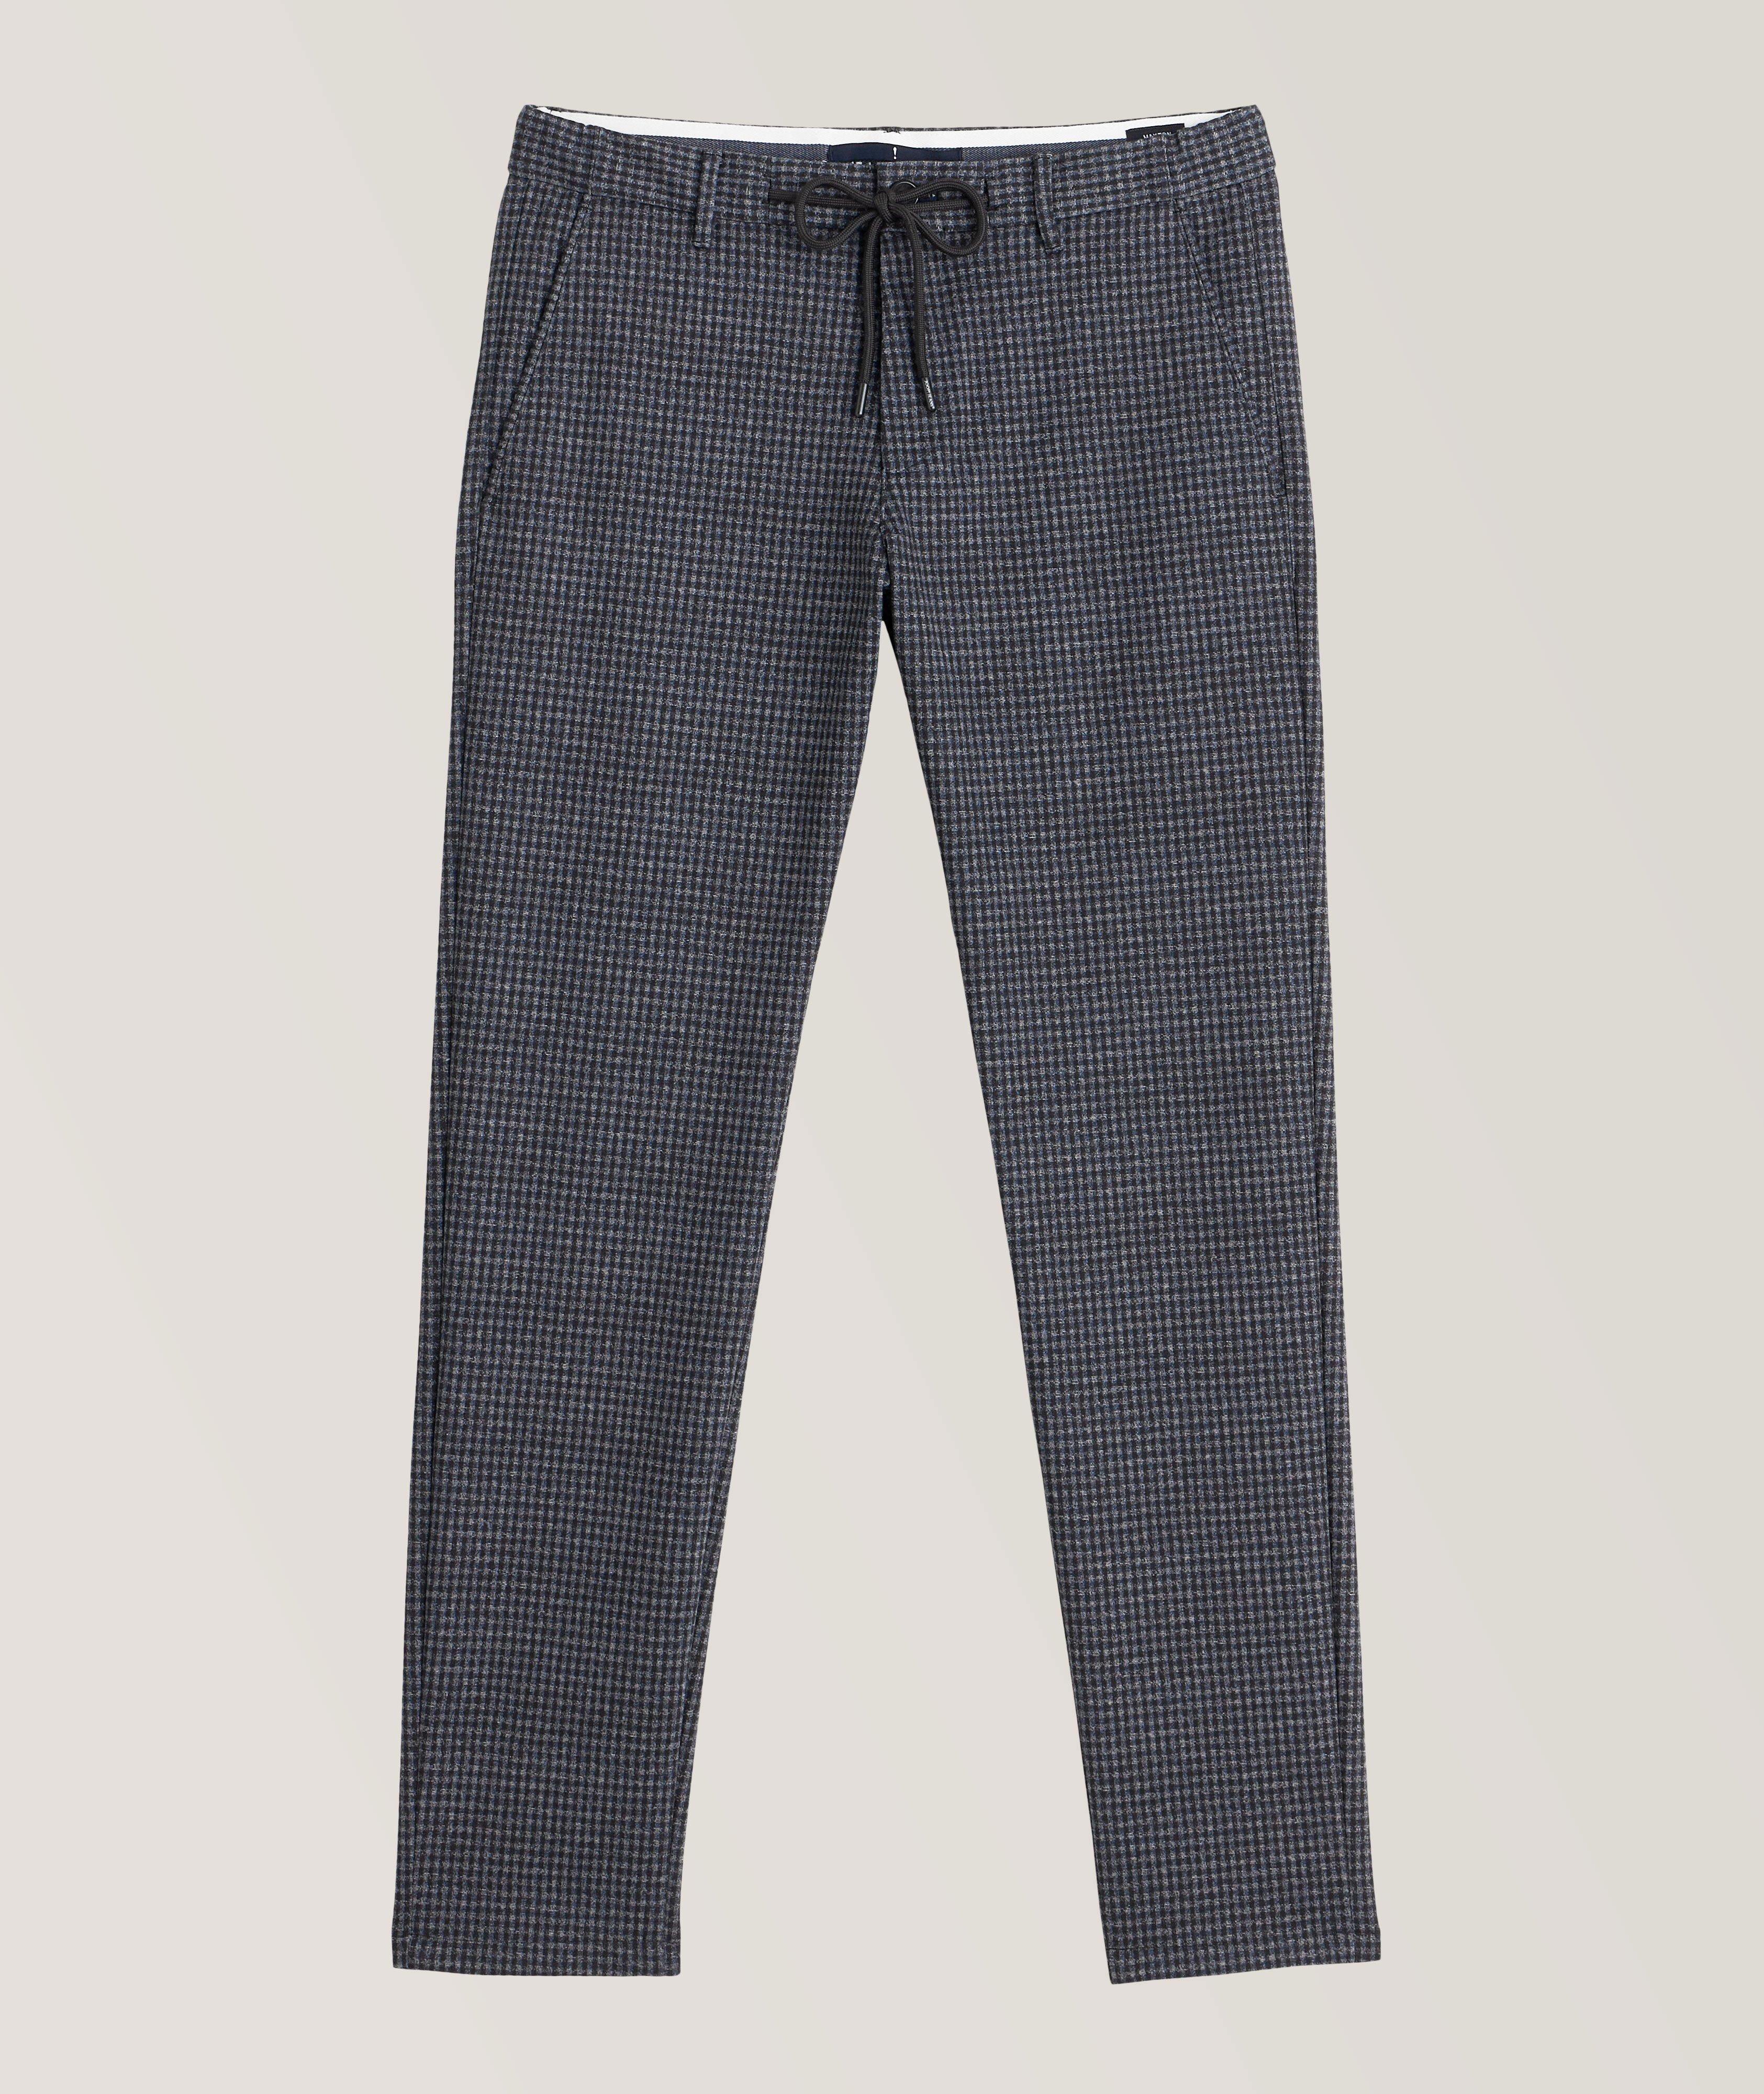 Checked Jersey Technical Fabric Pants image 0